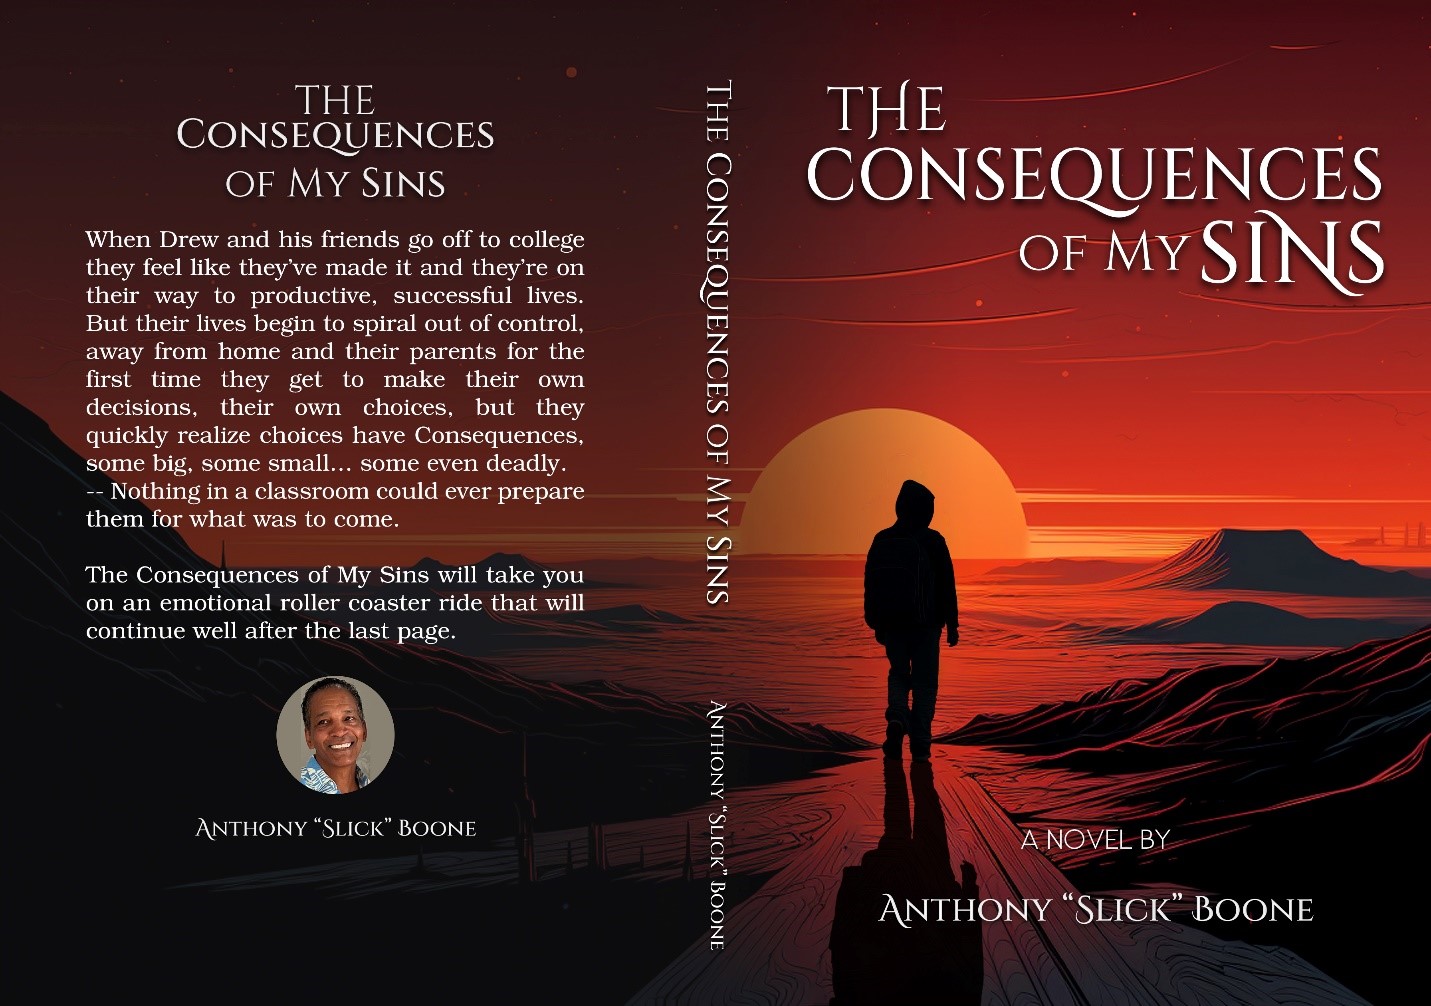 The Consequences of My Sins - A Tale of Choices And Redemption By Author Anthony "Slick" Boone